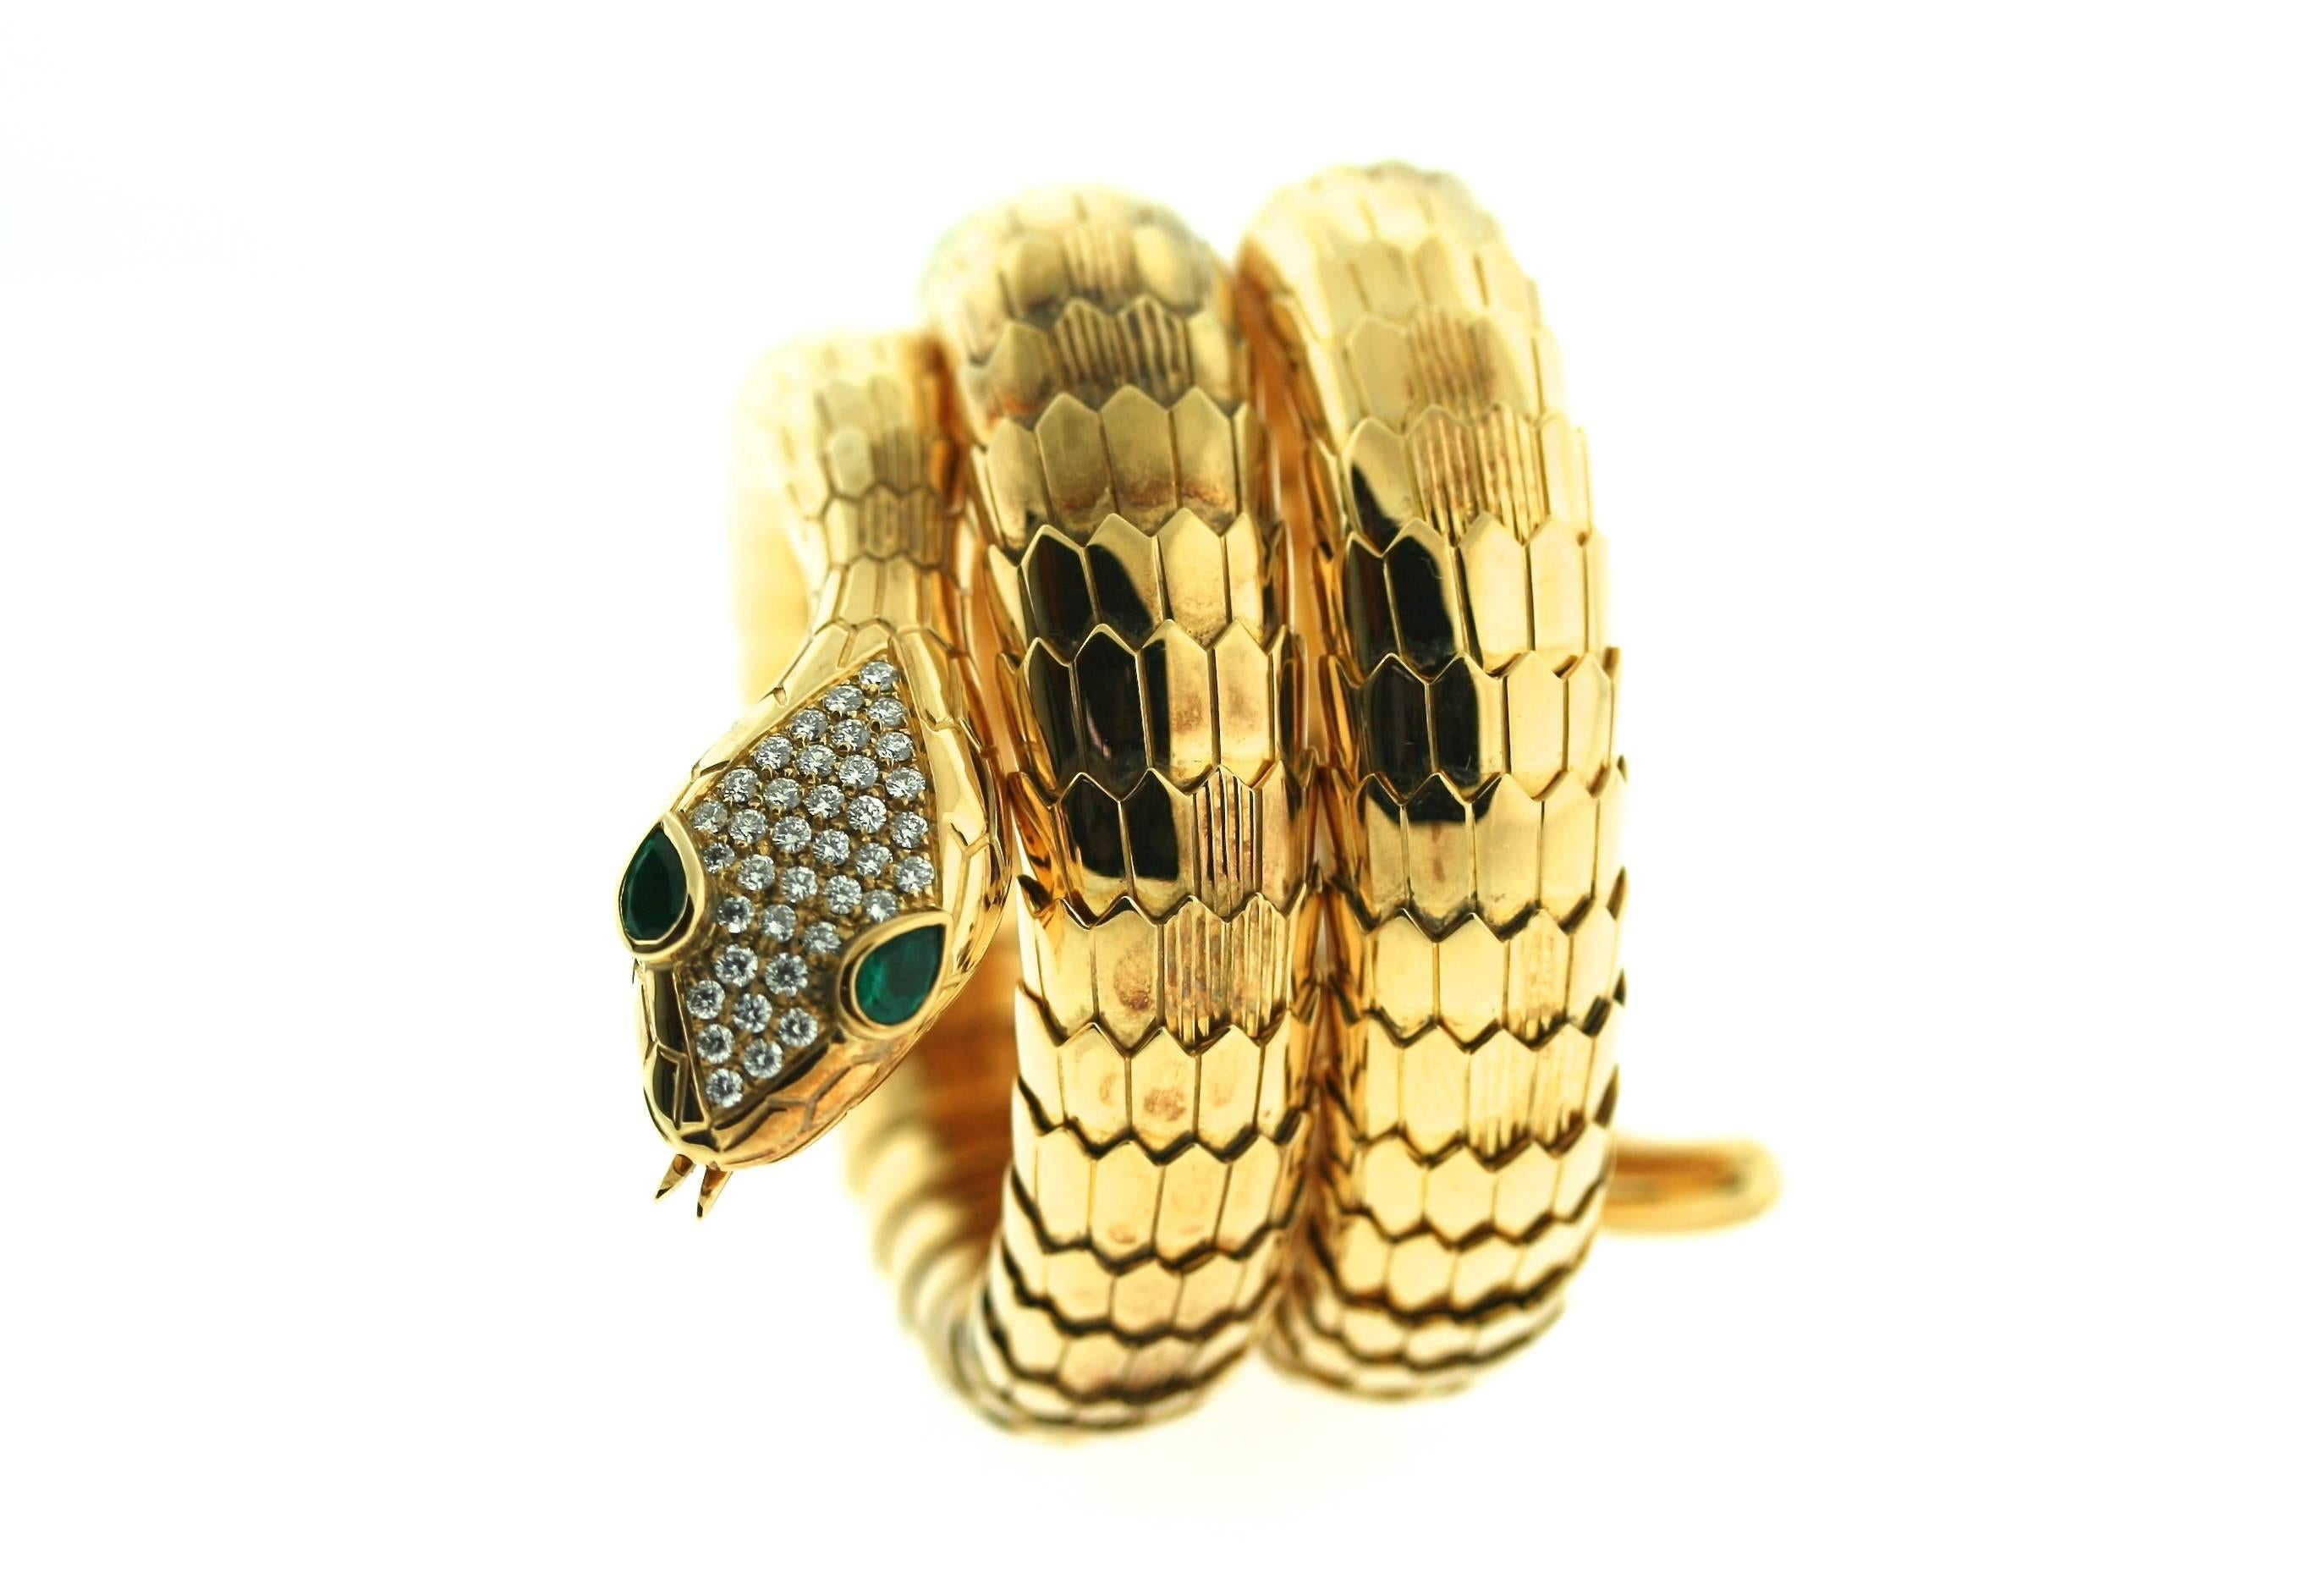 Illario 18k gold coiled serpent bracelet with both polished and textured scales. The serpent's head is pave set with diamonds and faceted emerald eyes. The tension mechanism of the bracelet allows for flexibility in both movement and fit. Illario is